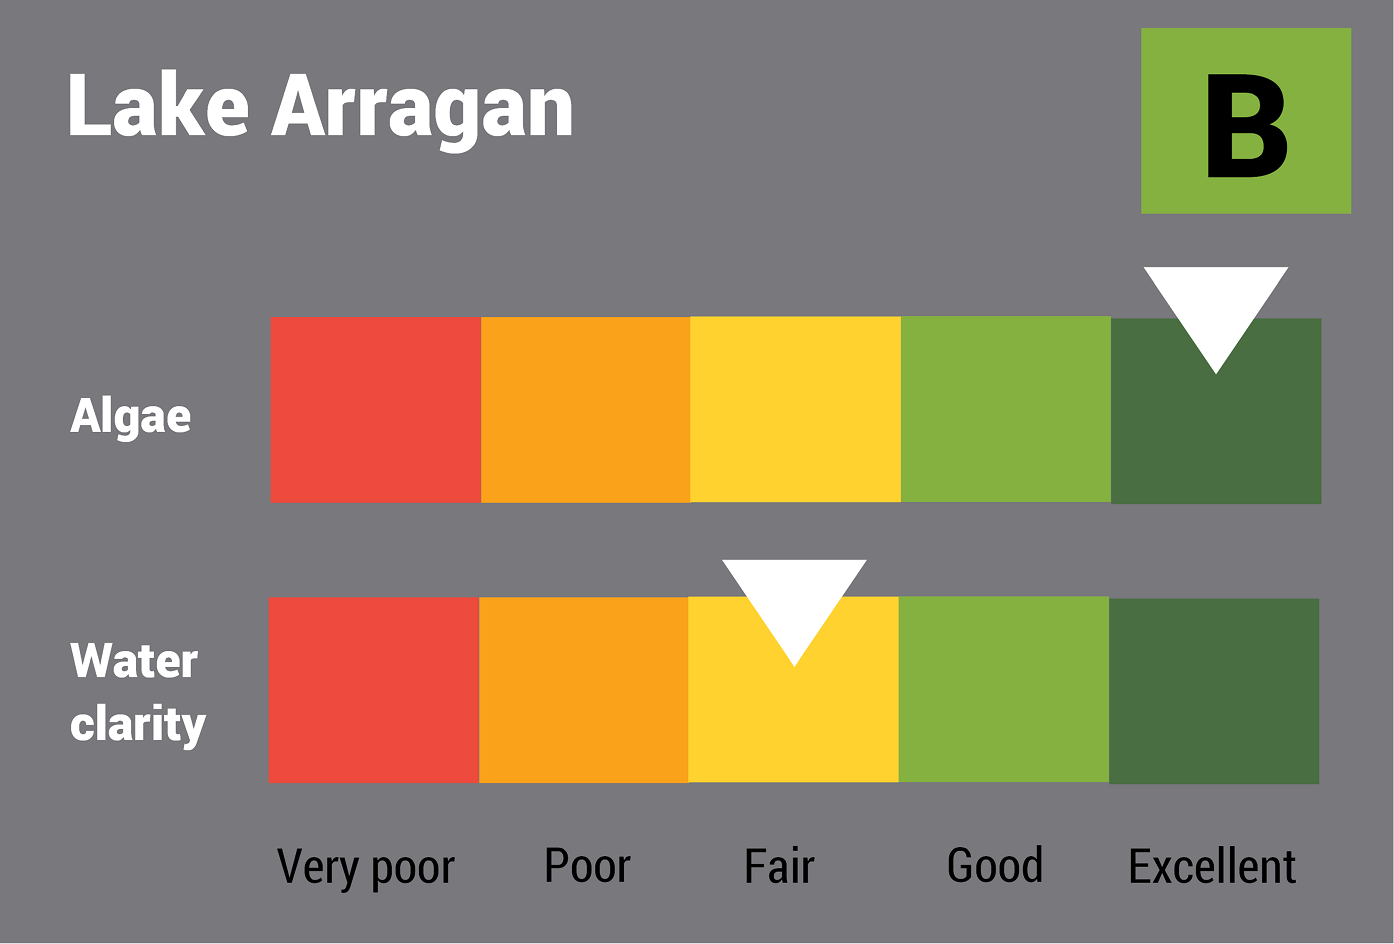 Lake Arragan water quality report card for algae and water clarity showing colour-coded ratings (red, orange, yellow, light green and dark green, which represent very poor, poor, fair, good and excellent, respectively). Algae is rated 'excellent' and water clarity is rated 'fair' giving an overall rating of 'good' or 'B'.